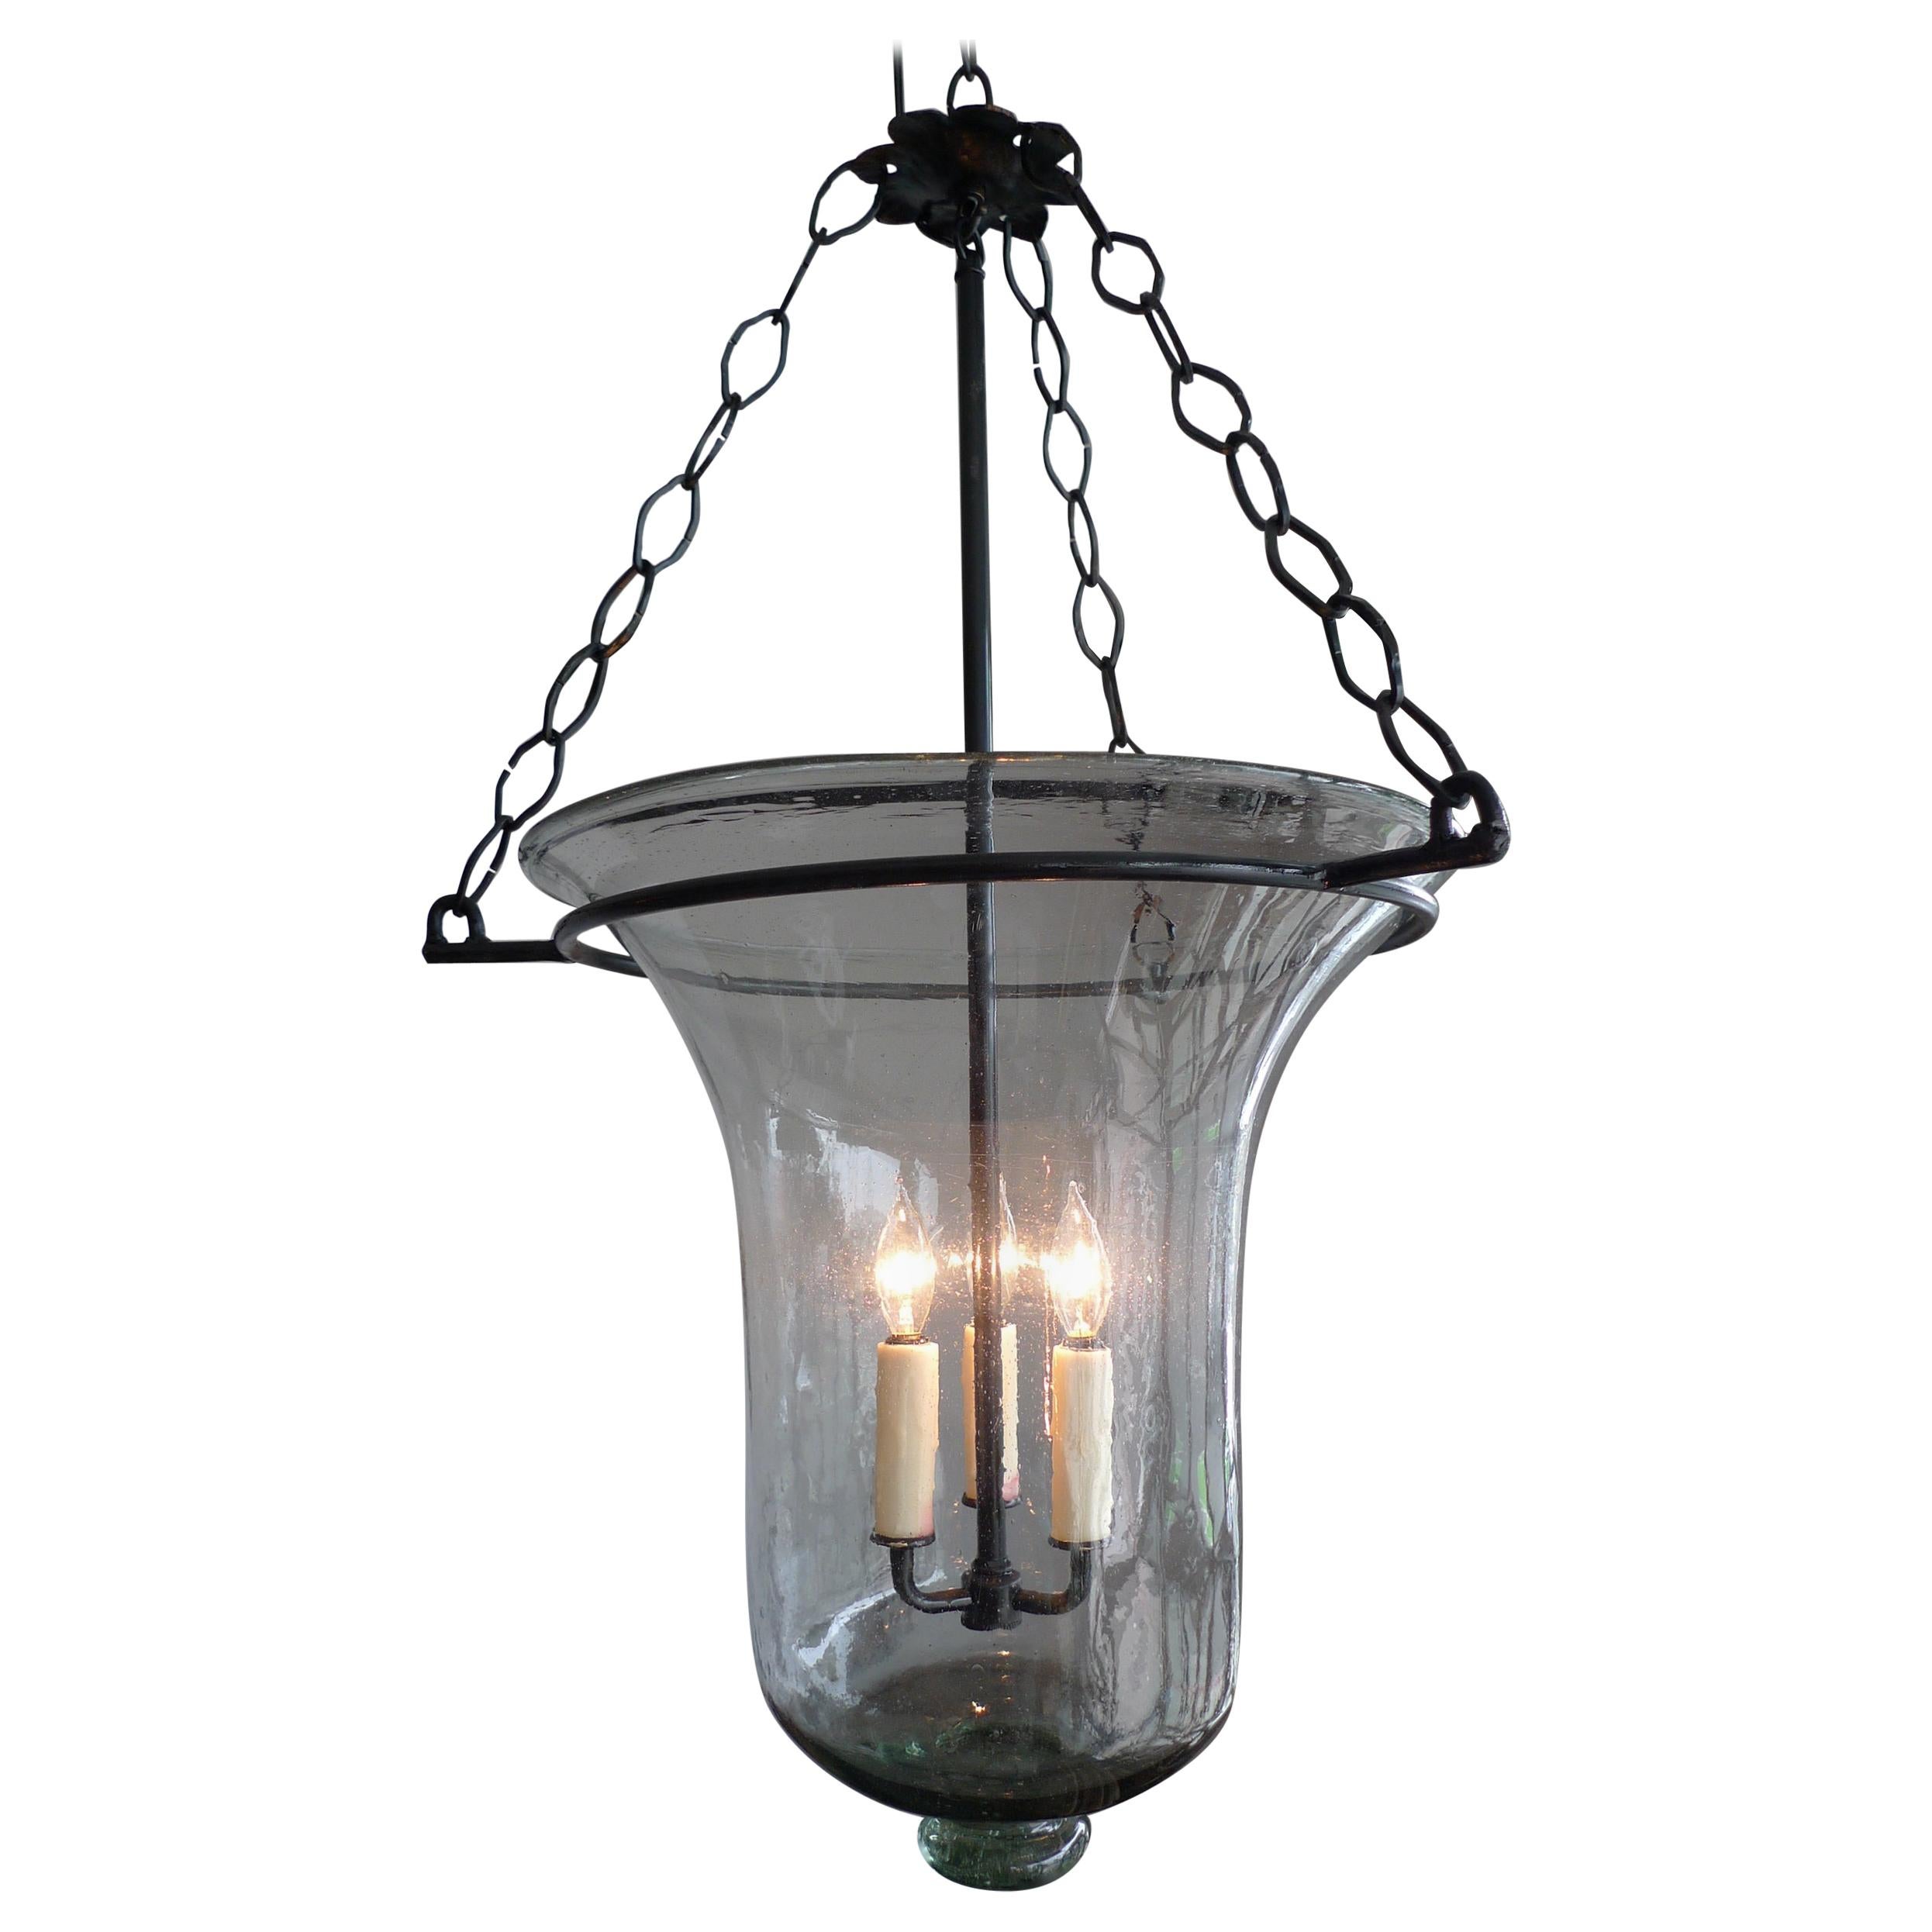 French Vintage Glass Bell Jar with Wrought Iron Fittings and 3 Centre Lights.